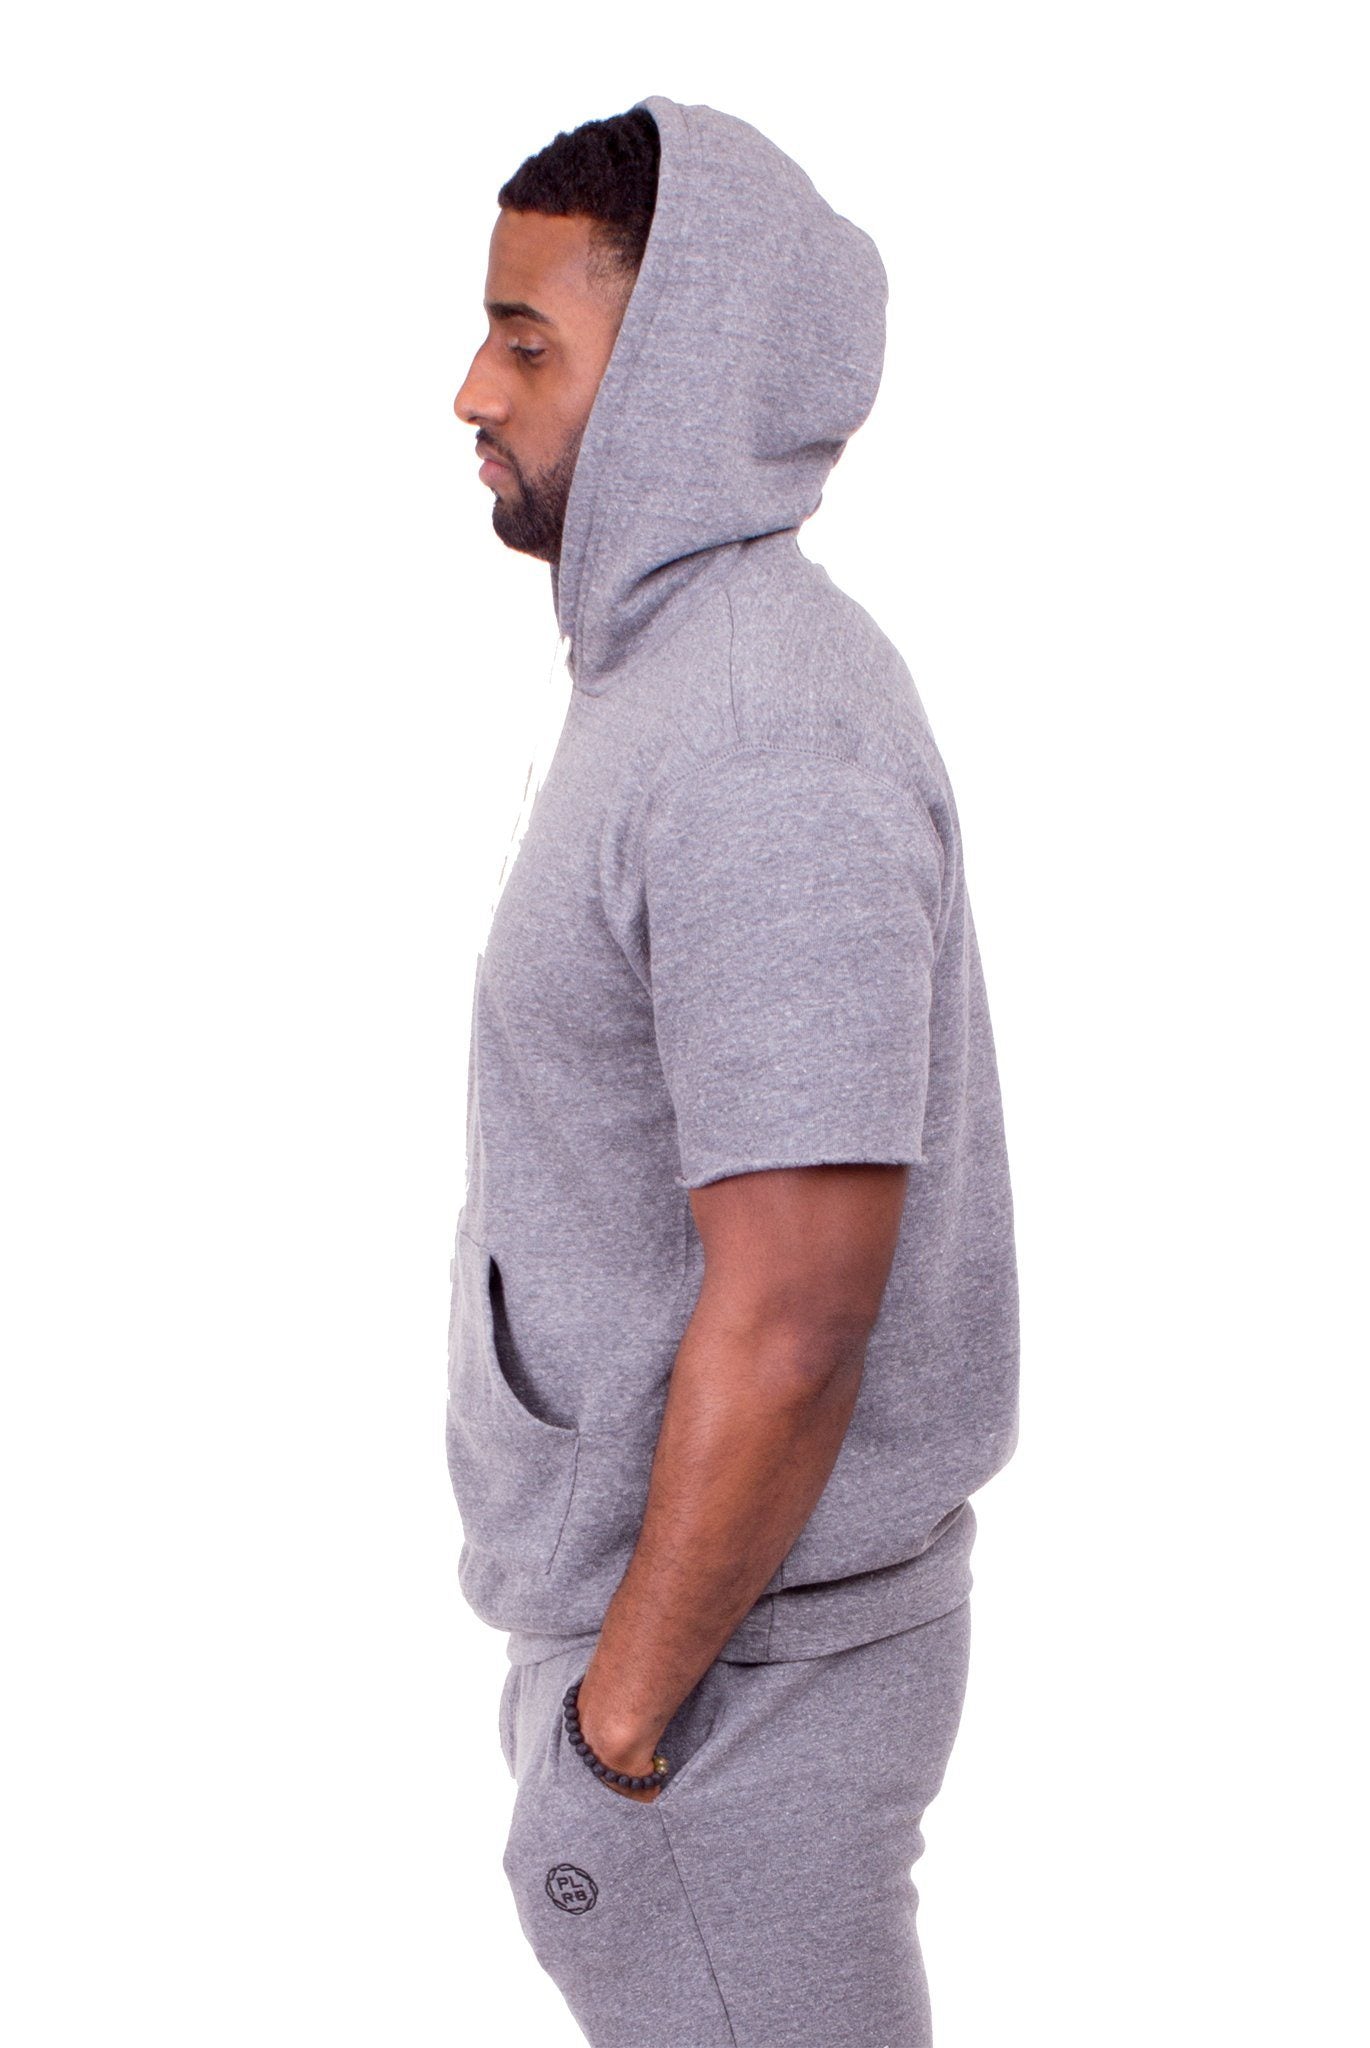 HUMBLE SHORT SLEEVE HOODIE | Poor Little Rich Boy Clothing